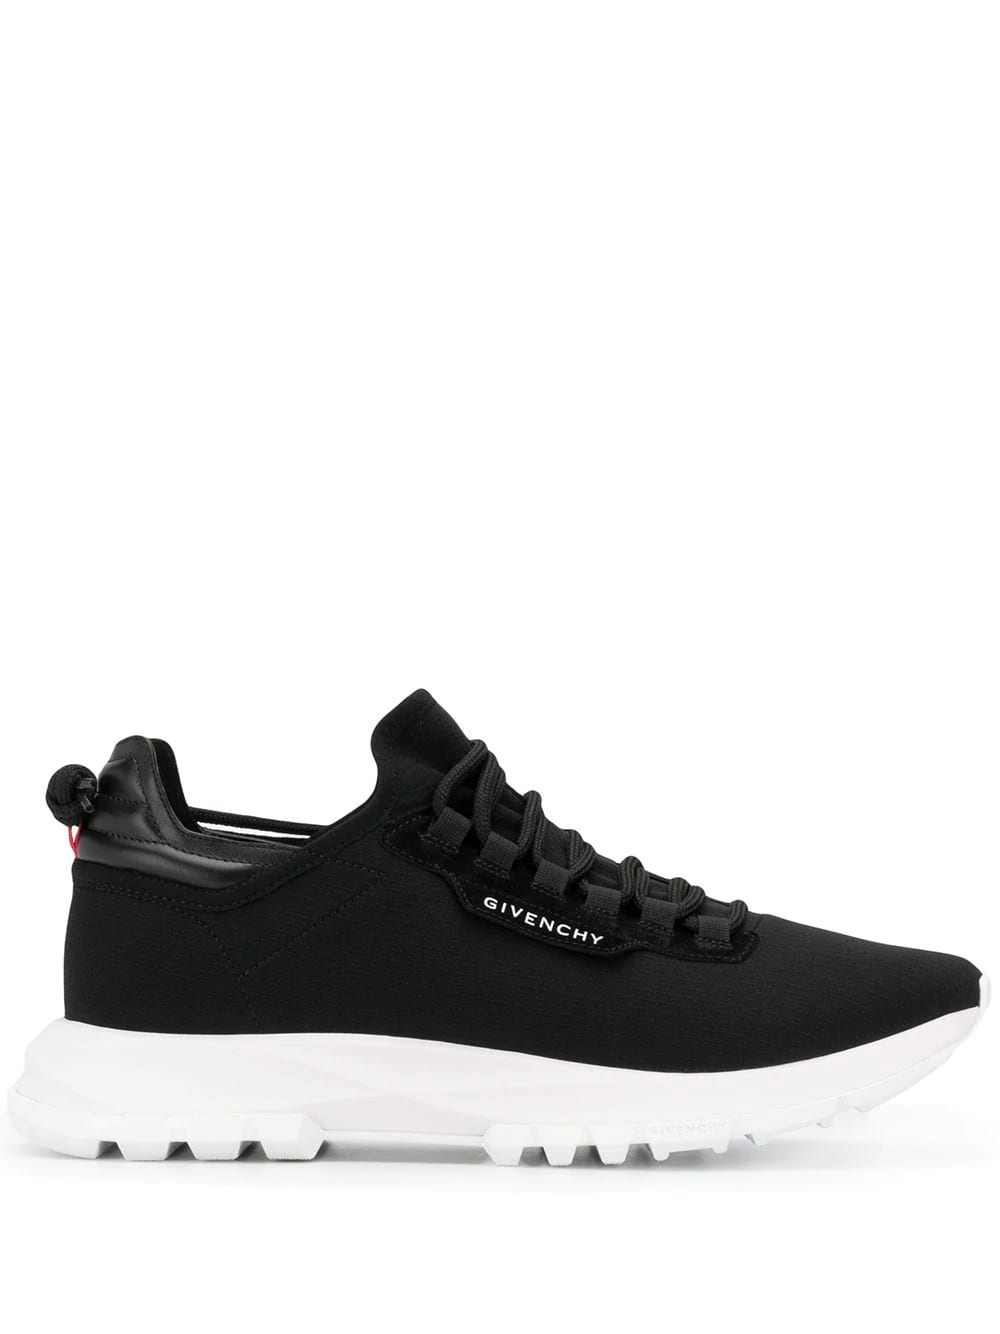 Givenchy Man Black And White Spectre Sneakers